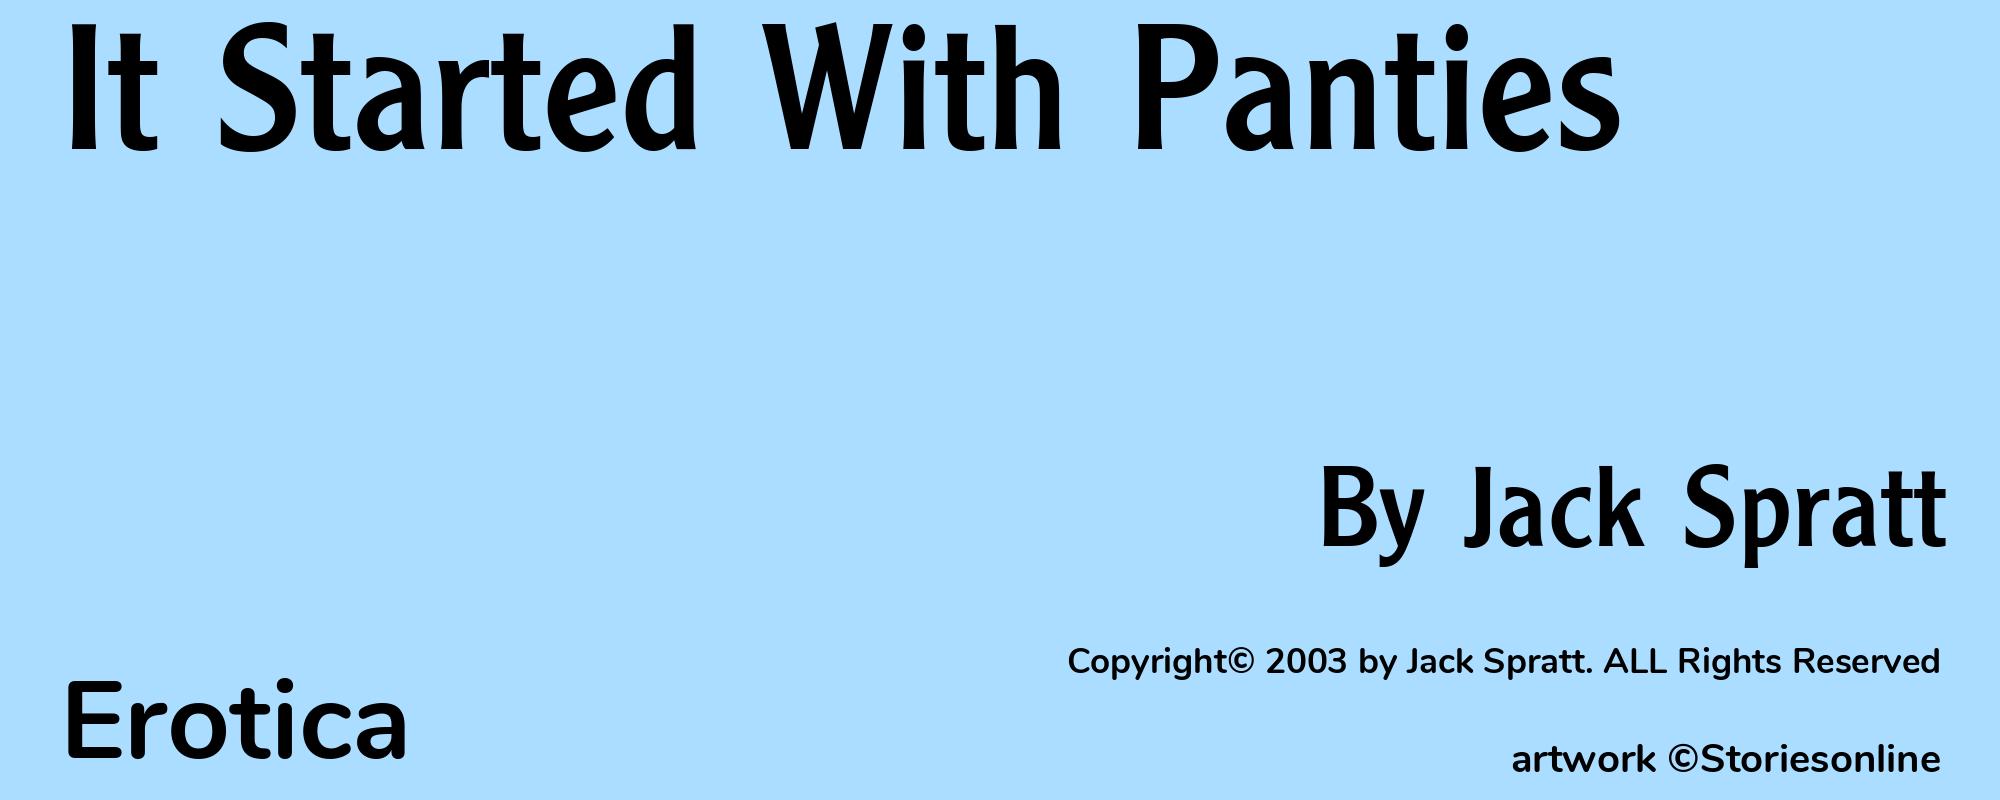 It Started With Panties - Cover